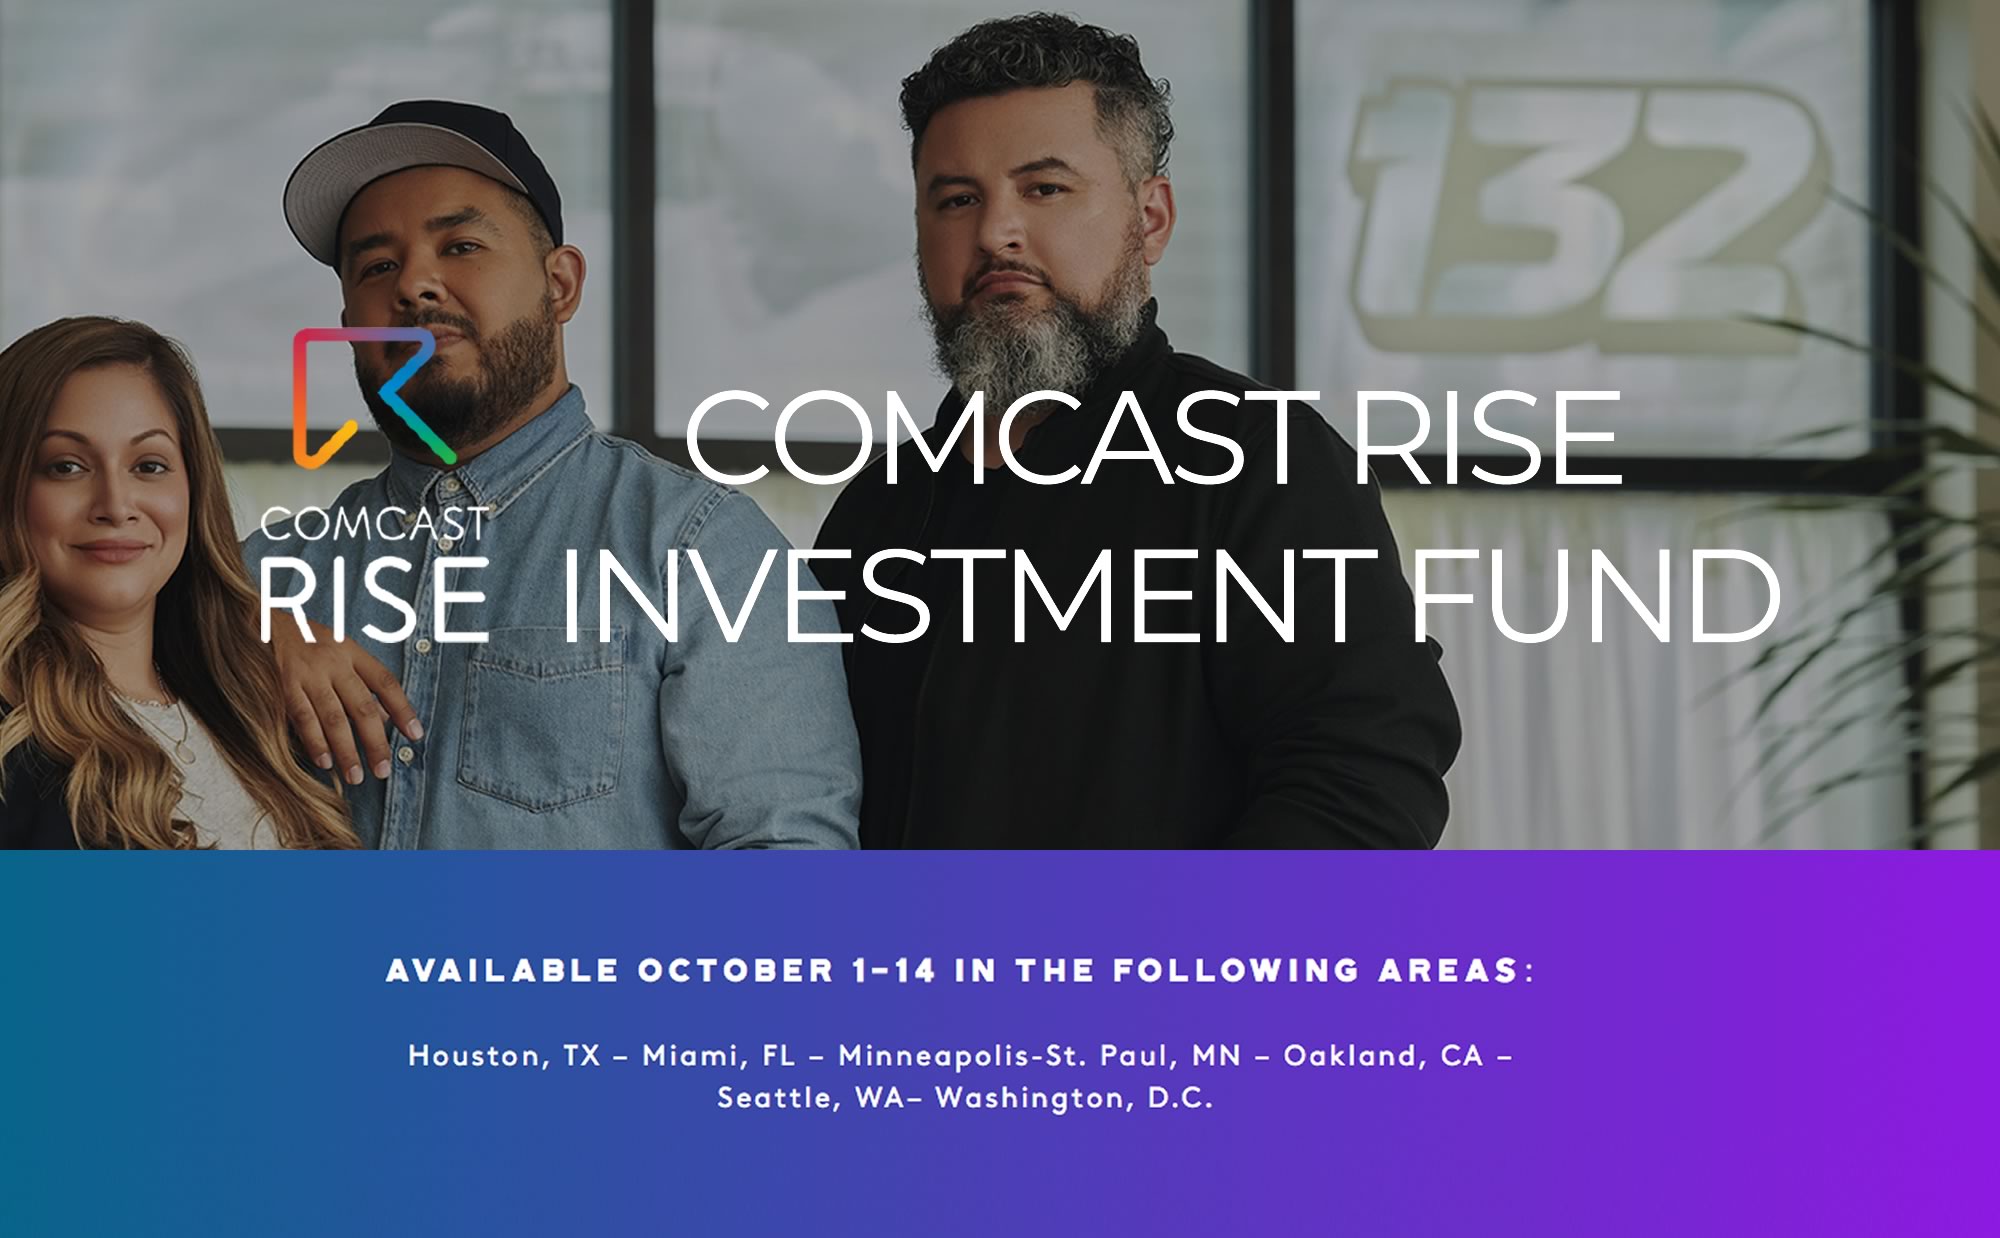 You are currently viewing Comcast RISE Investment Fund